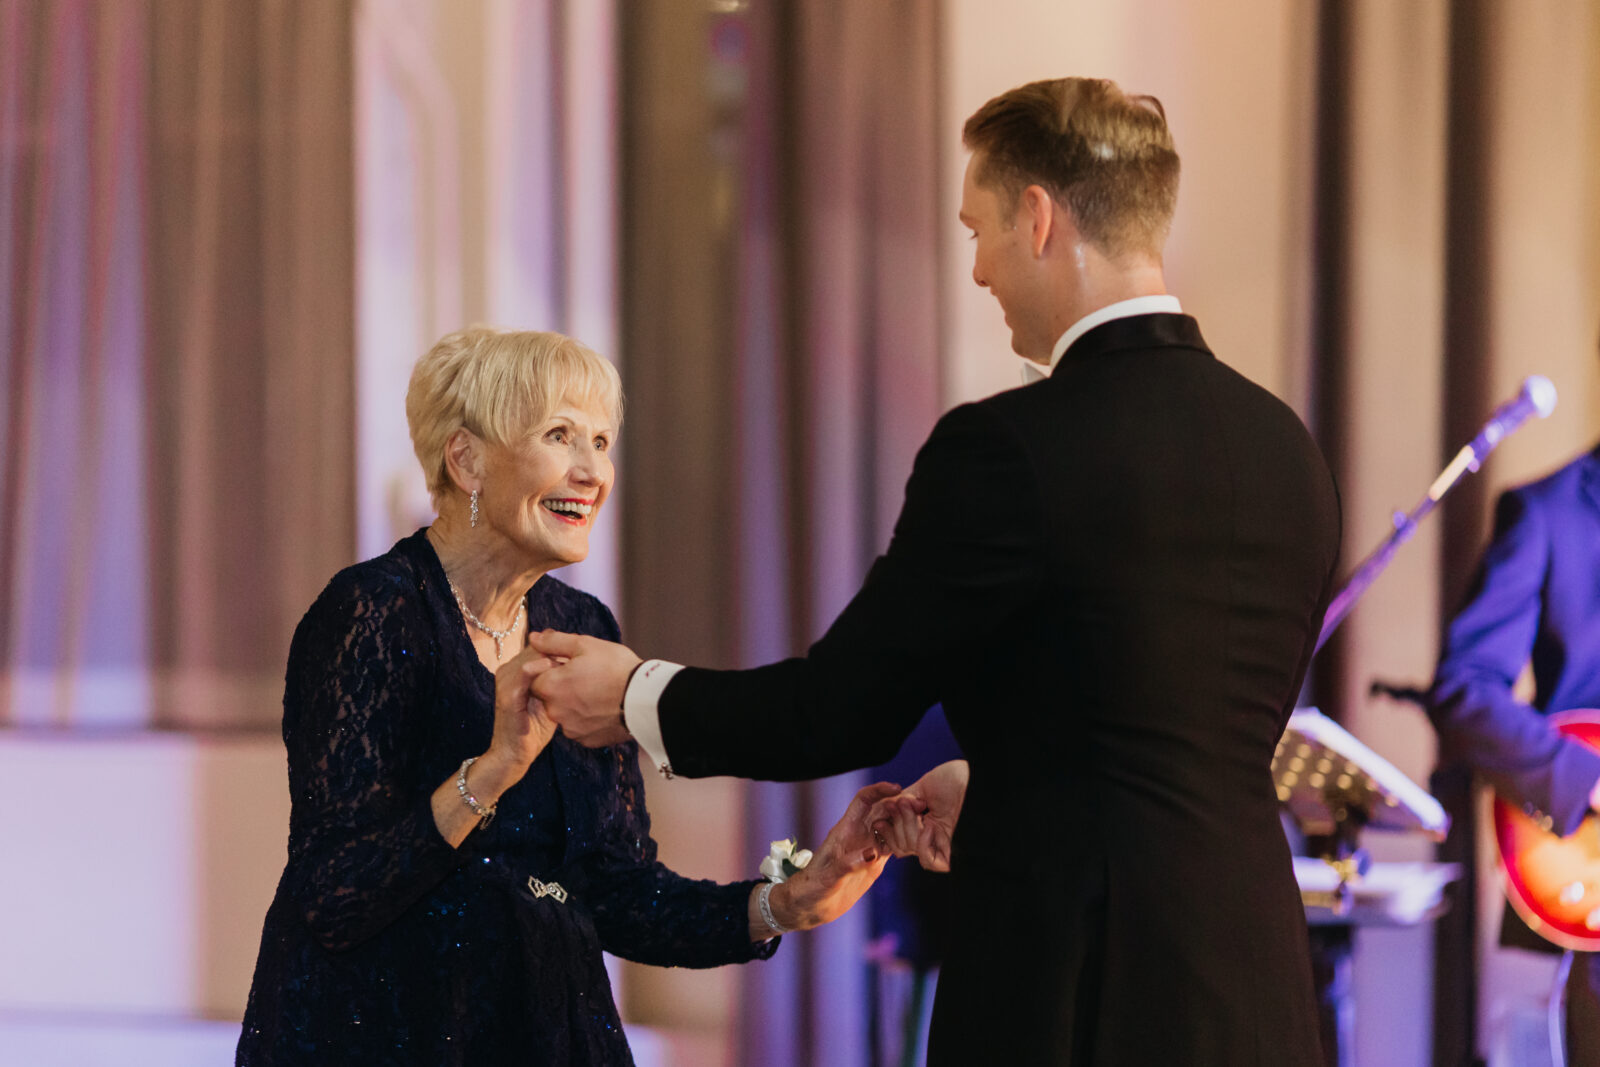 A photo of the groom dancing with his mother on his wedding day